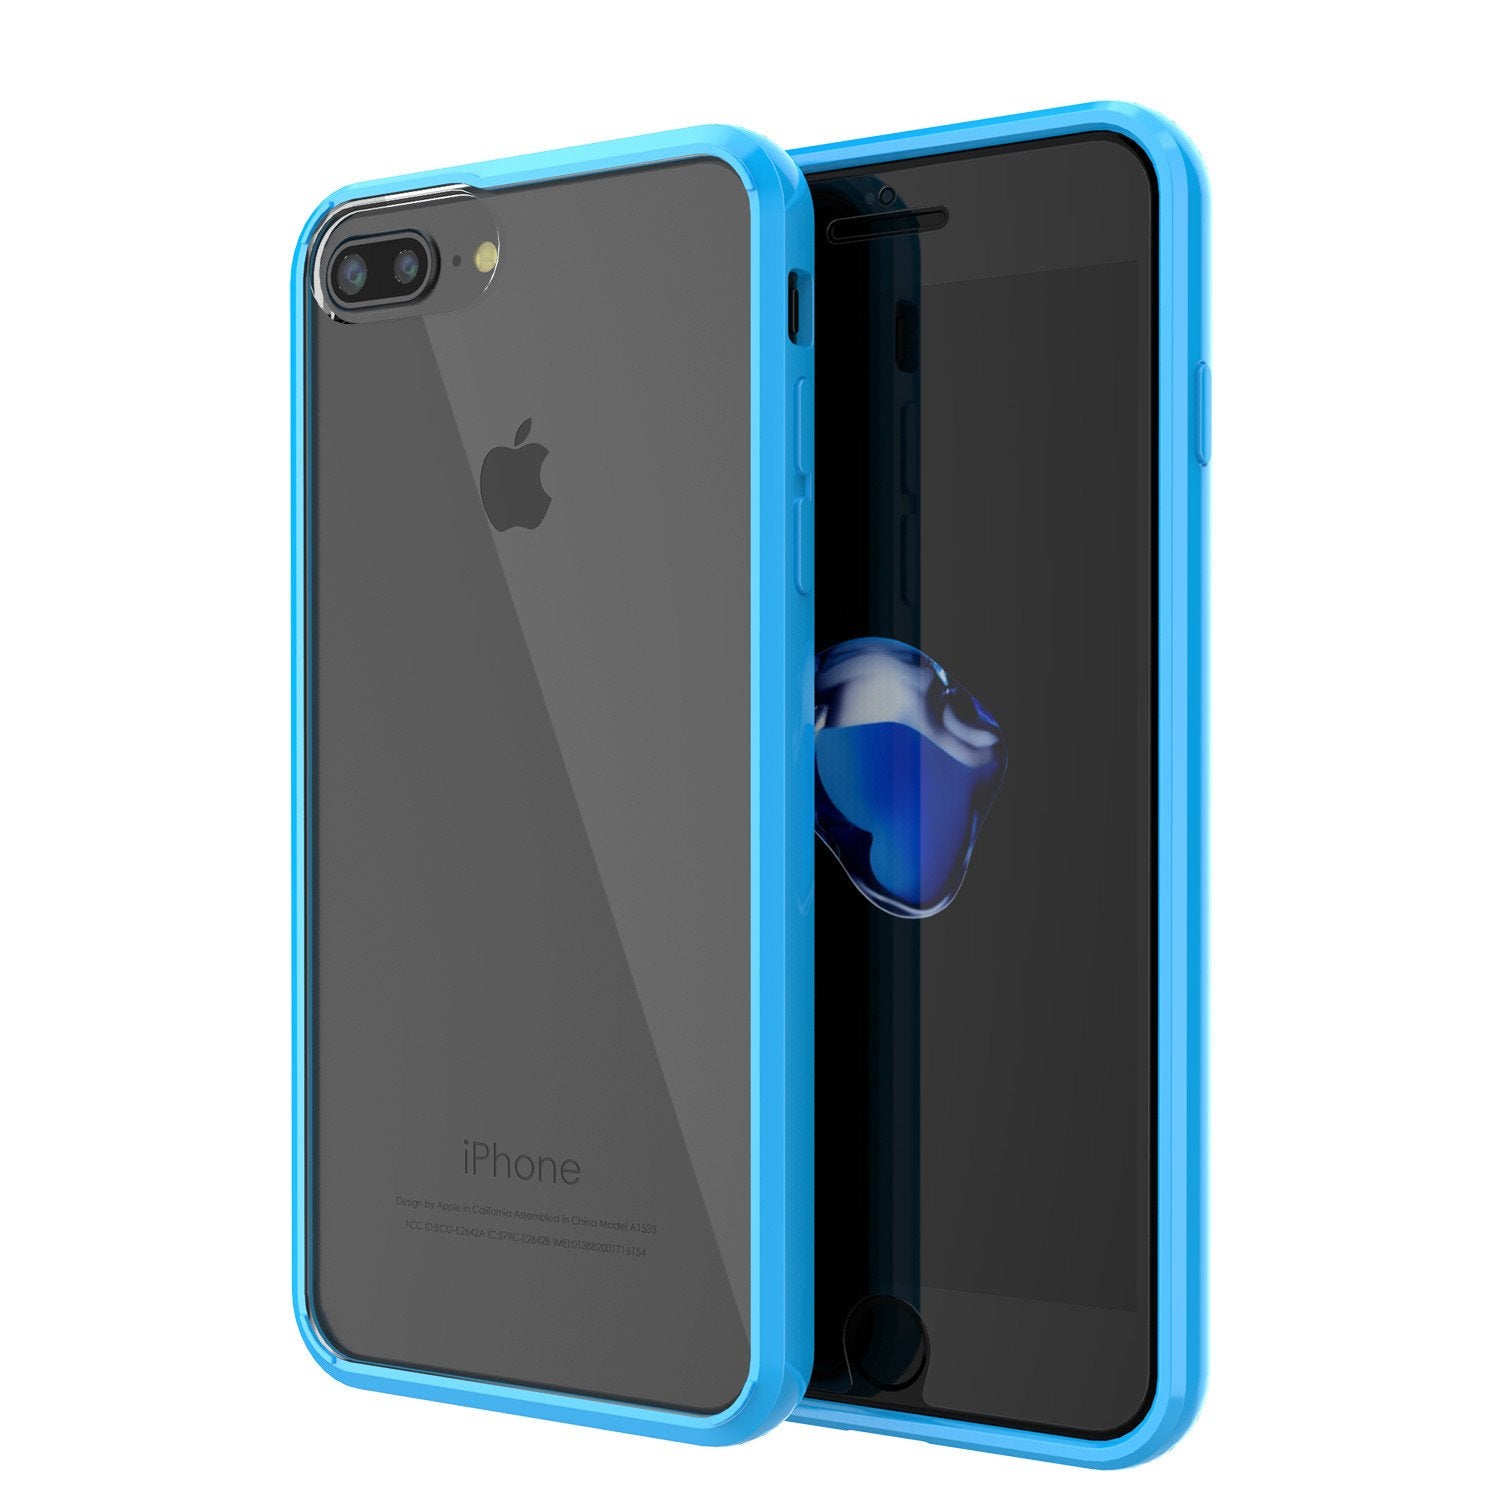 iPhone 7 Case Punkcase® LUCID 2.0 Light Blue Series w/ PUNK SHIELD Screen Protector | Ultra Fit - PunkCase NZ